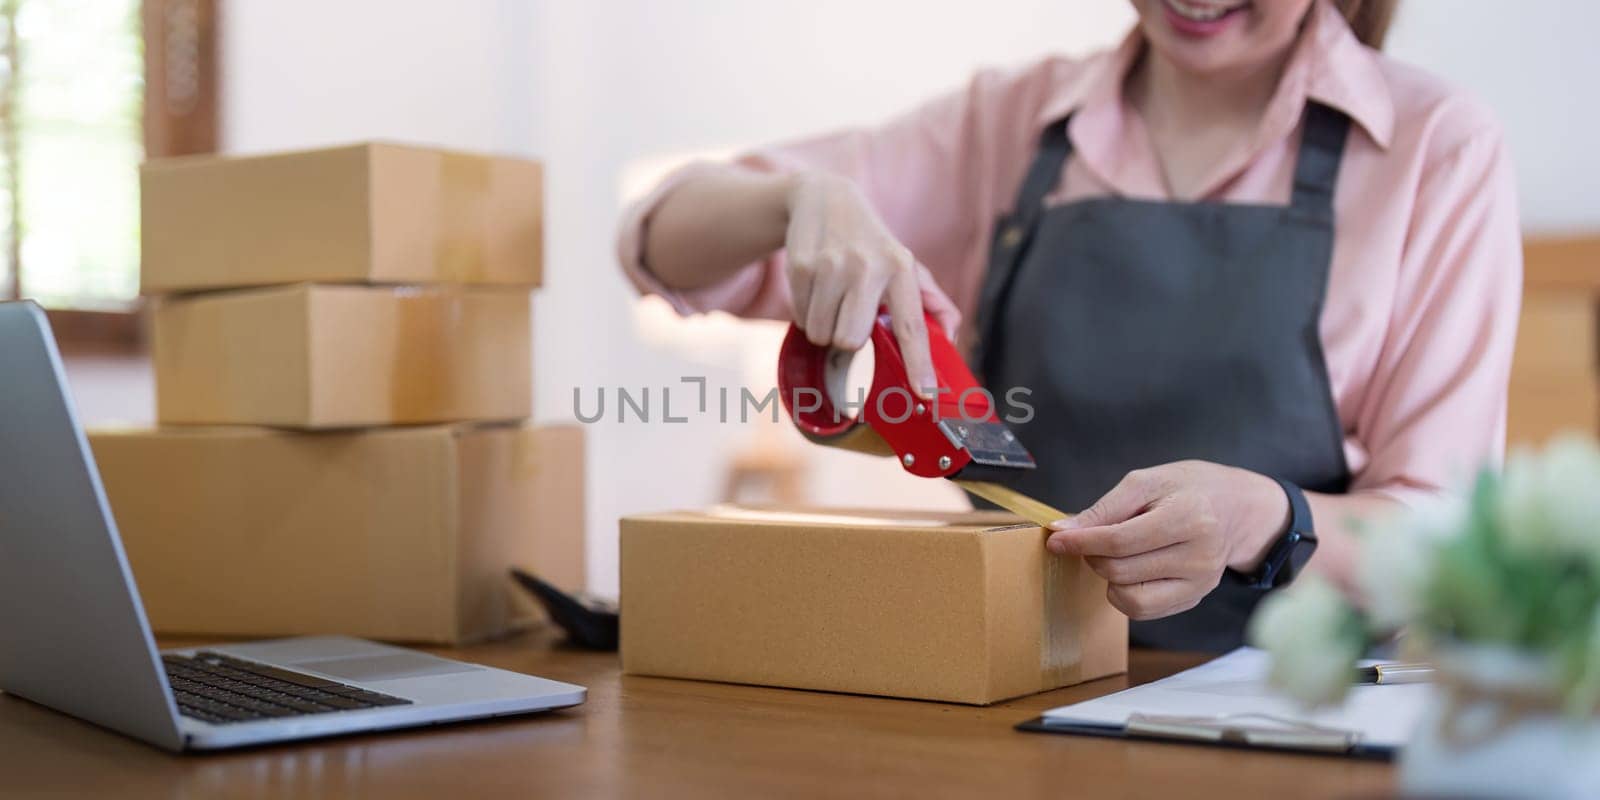 Woman use scotch tape to attach parcel boxes to prepare goods for the process of packaging, shipping, online sale internet marketing ecommerce concept startup business idea by nateemee